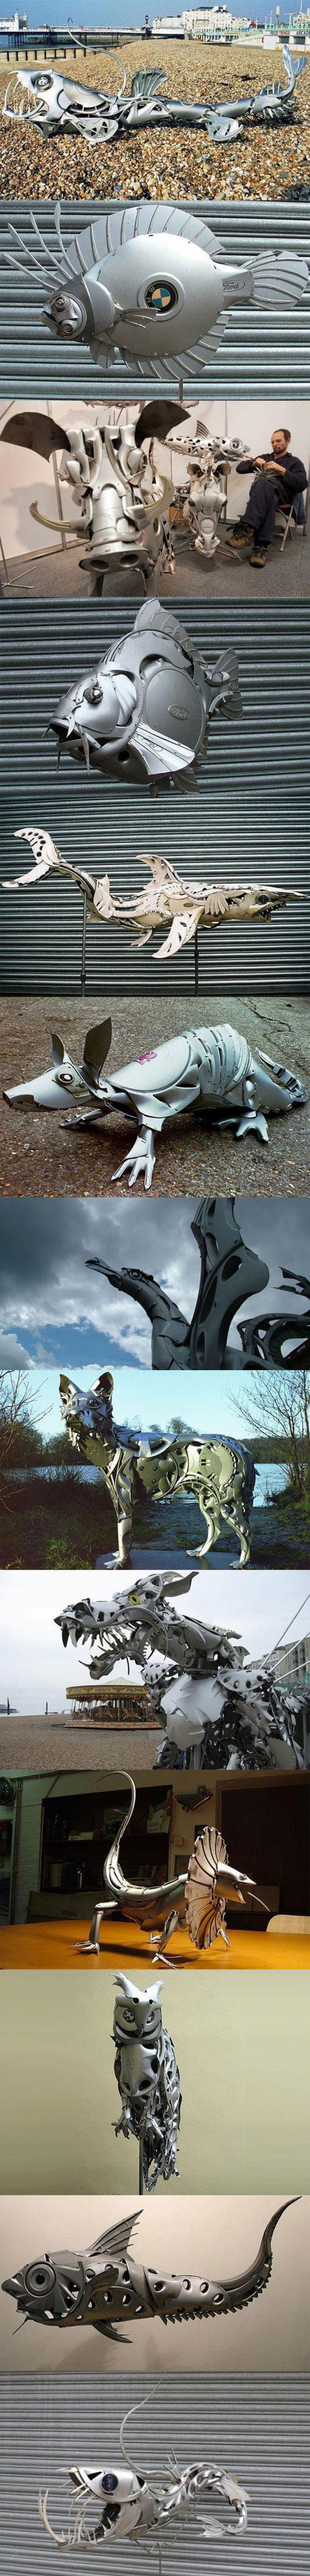 Awesome Hubcap Sculptures